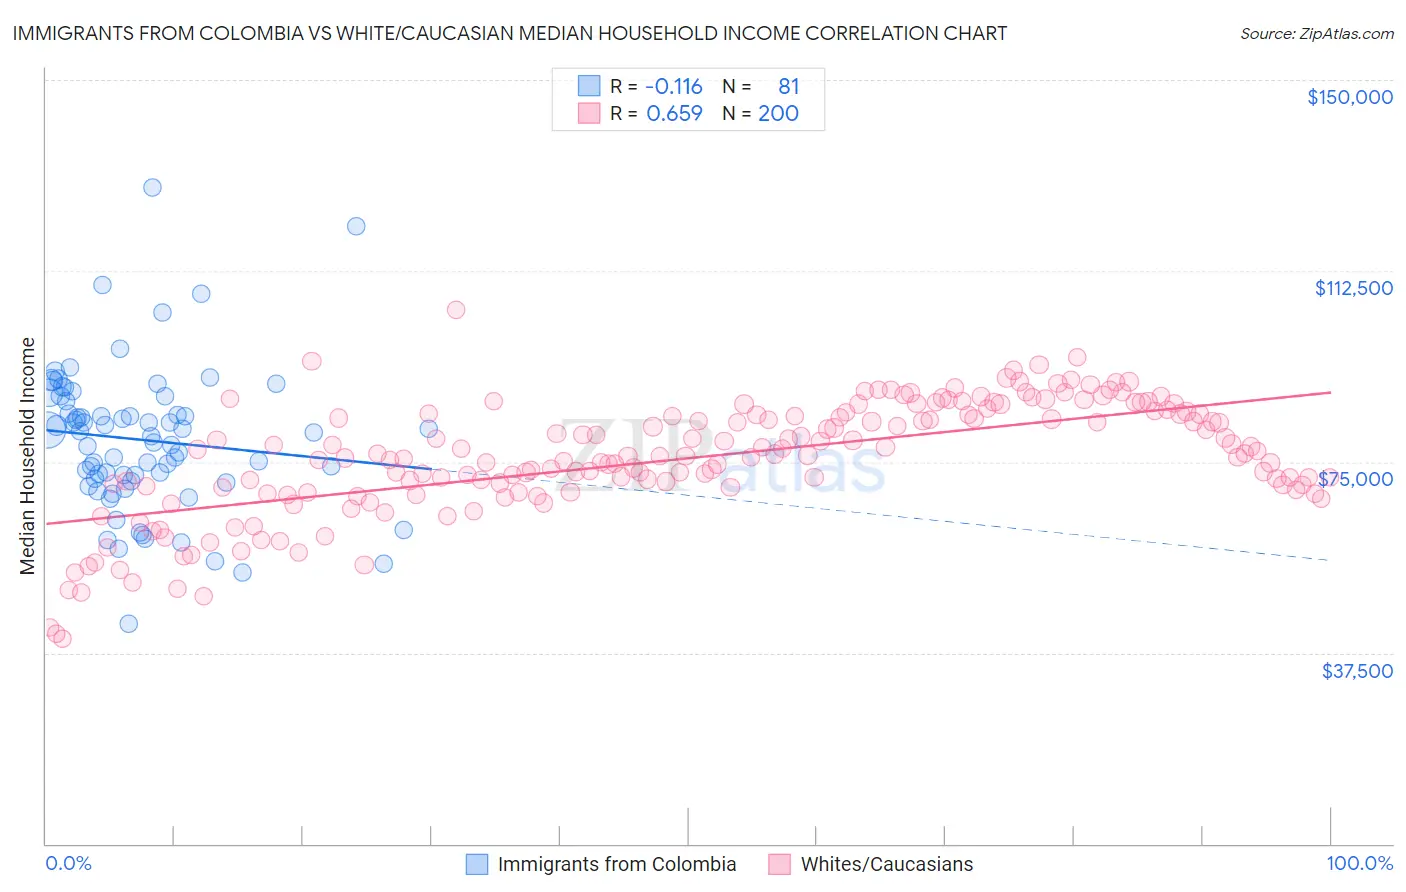 Immigrants from Colombia vs White/Caucasian Median Household Income